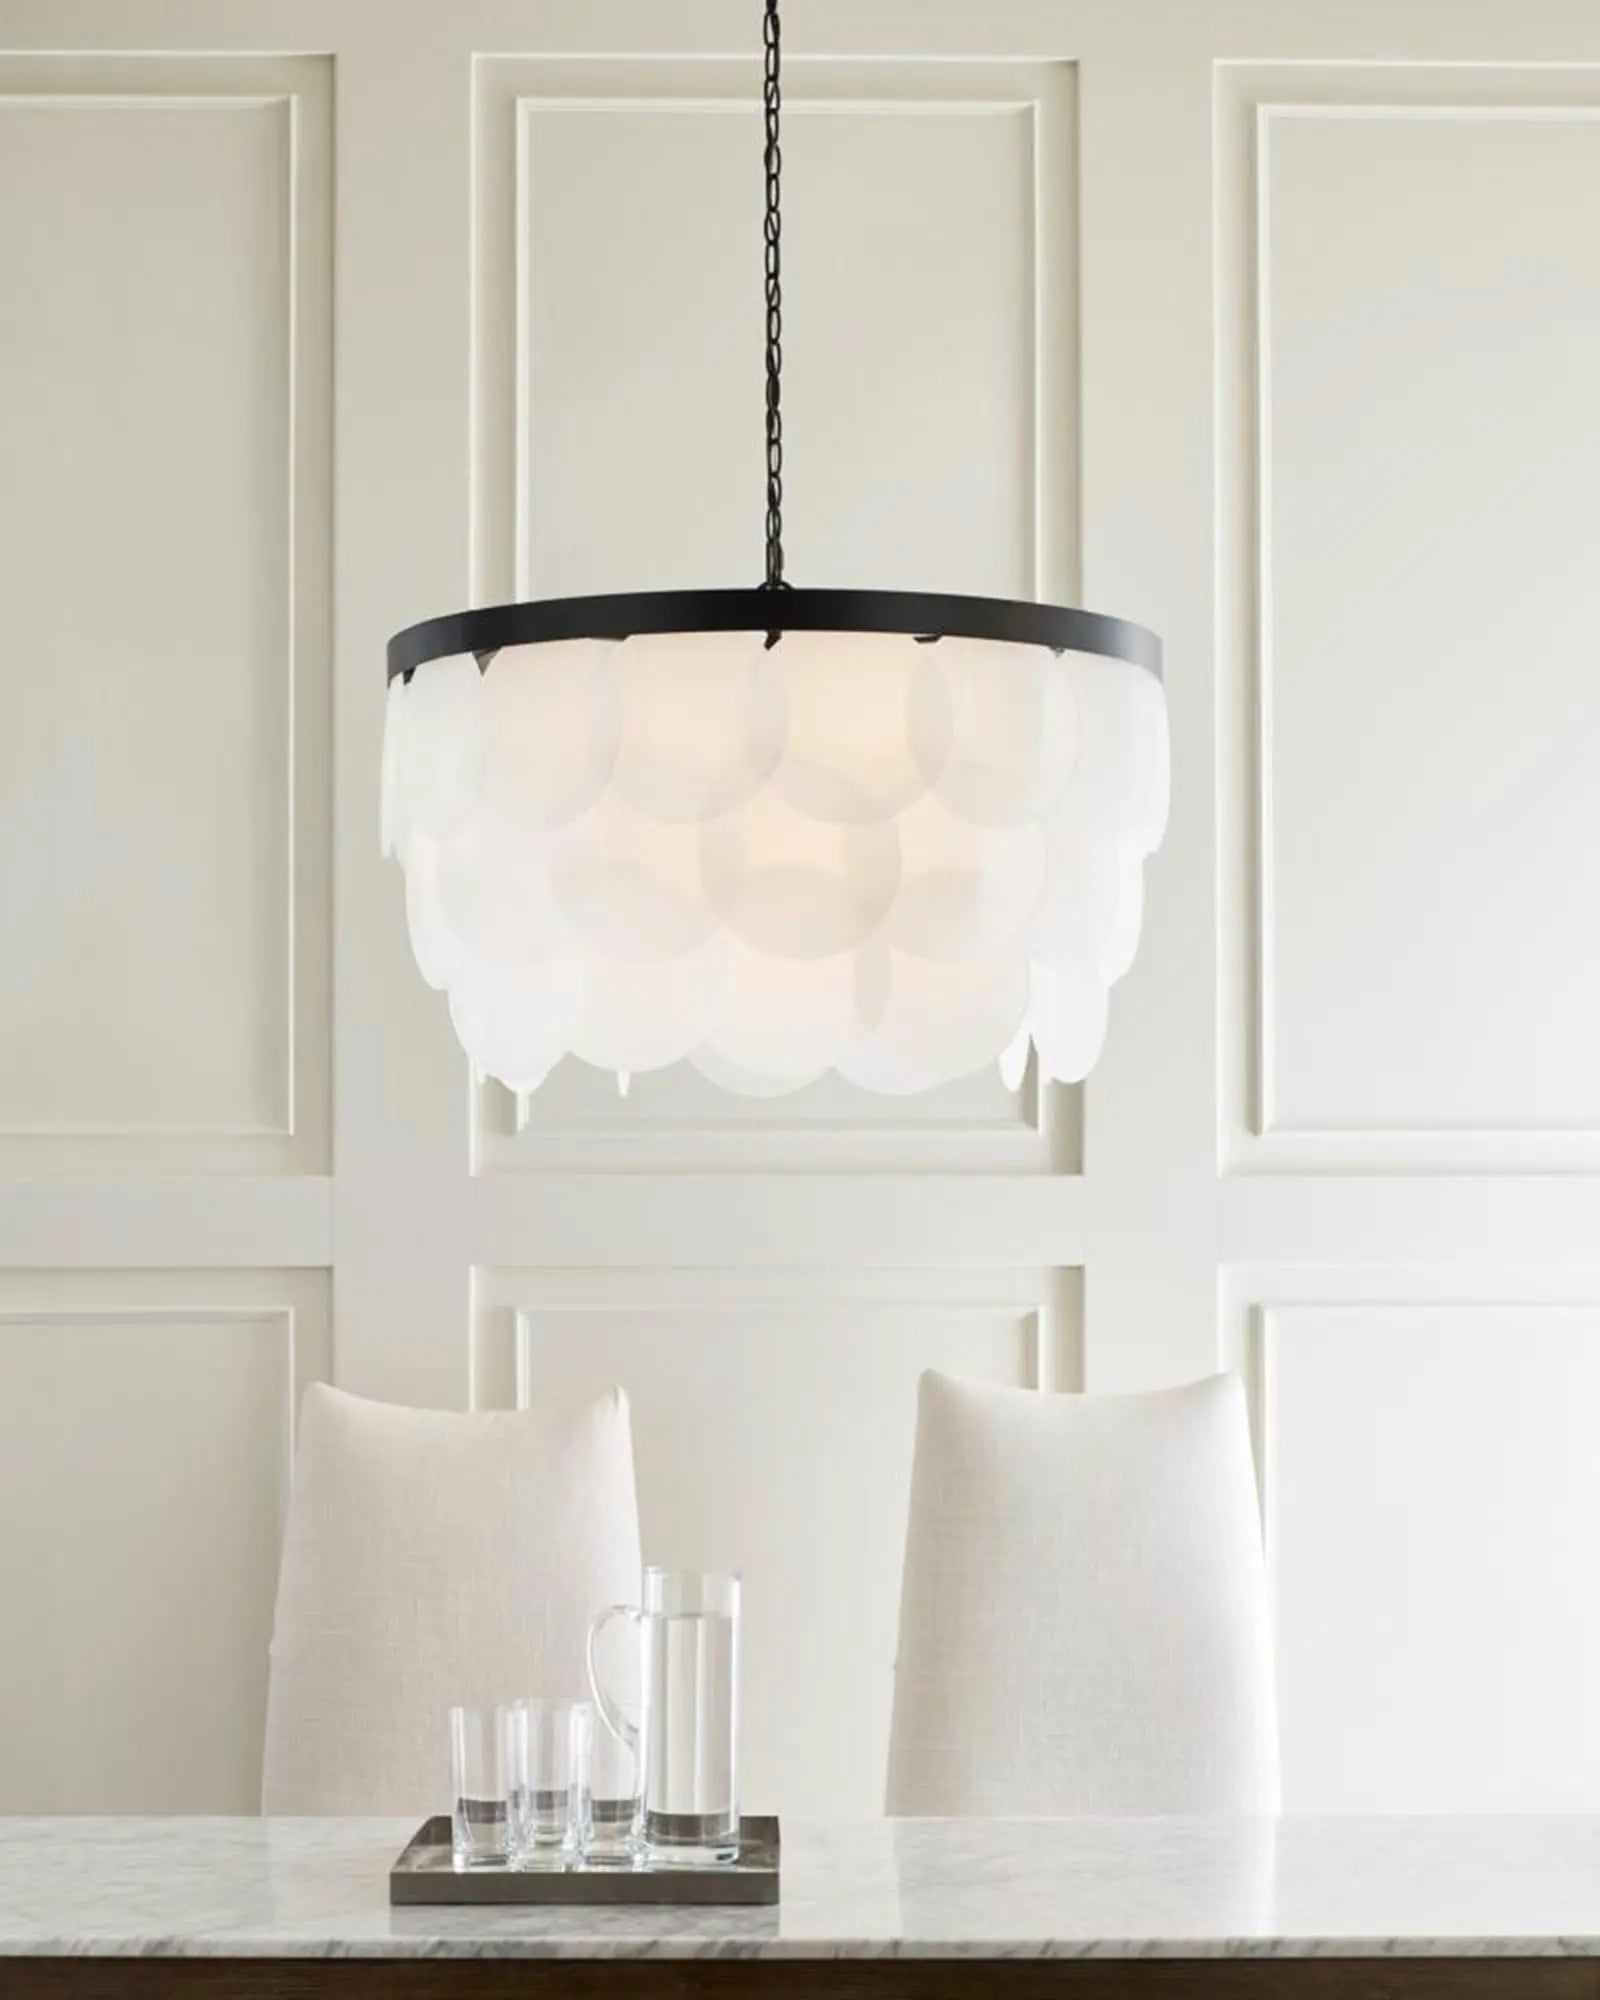 Mellita Traditional pendant light above a marble table